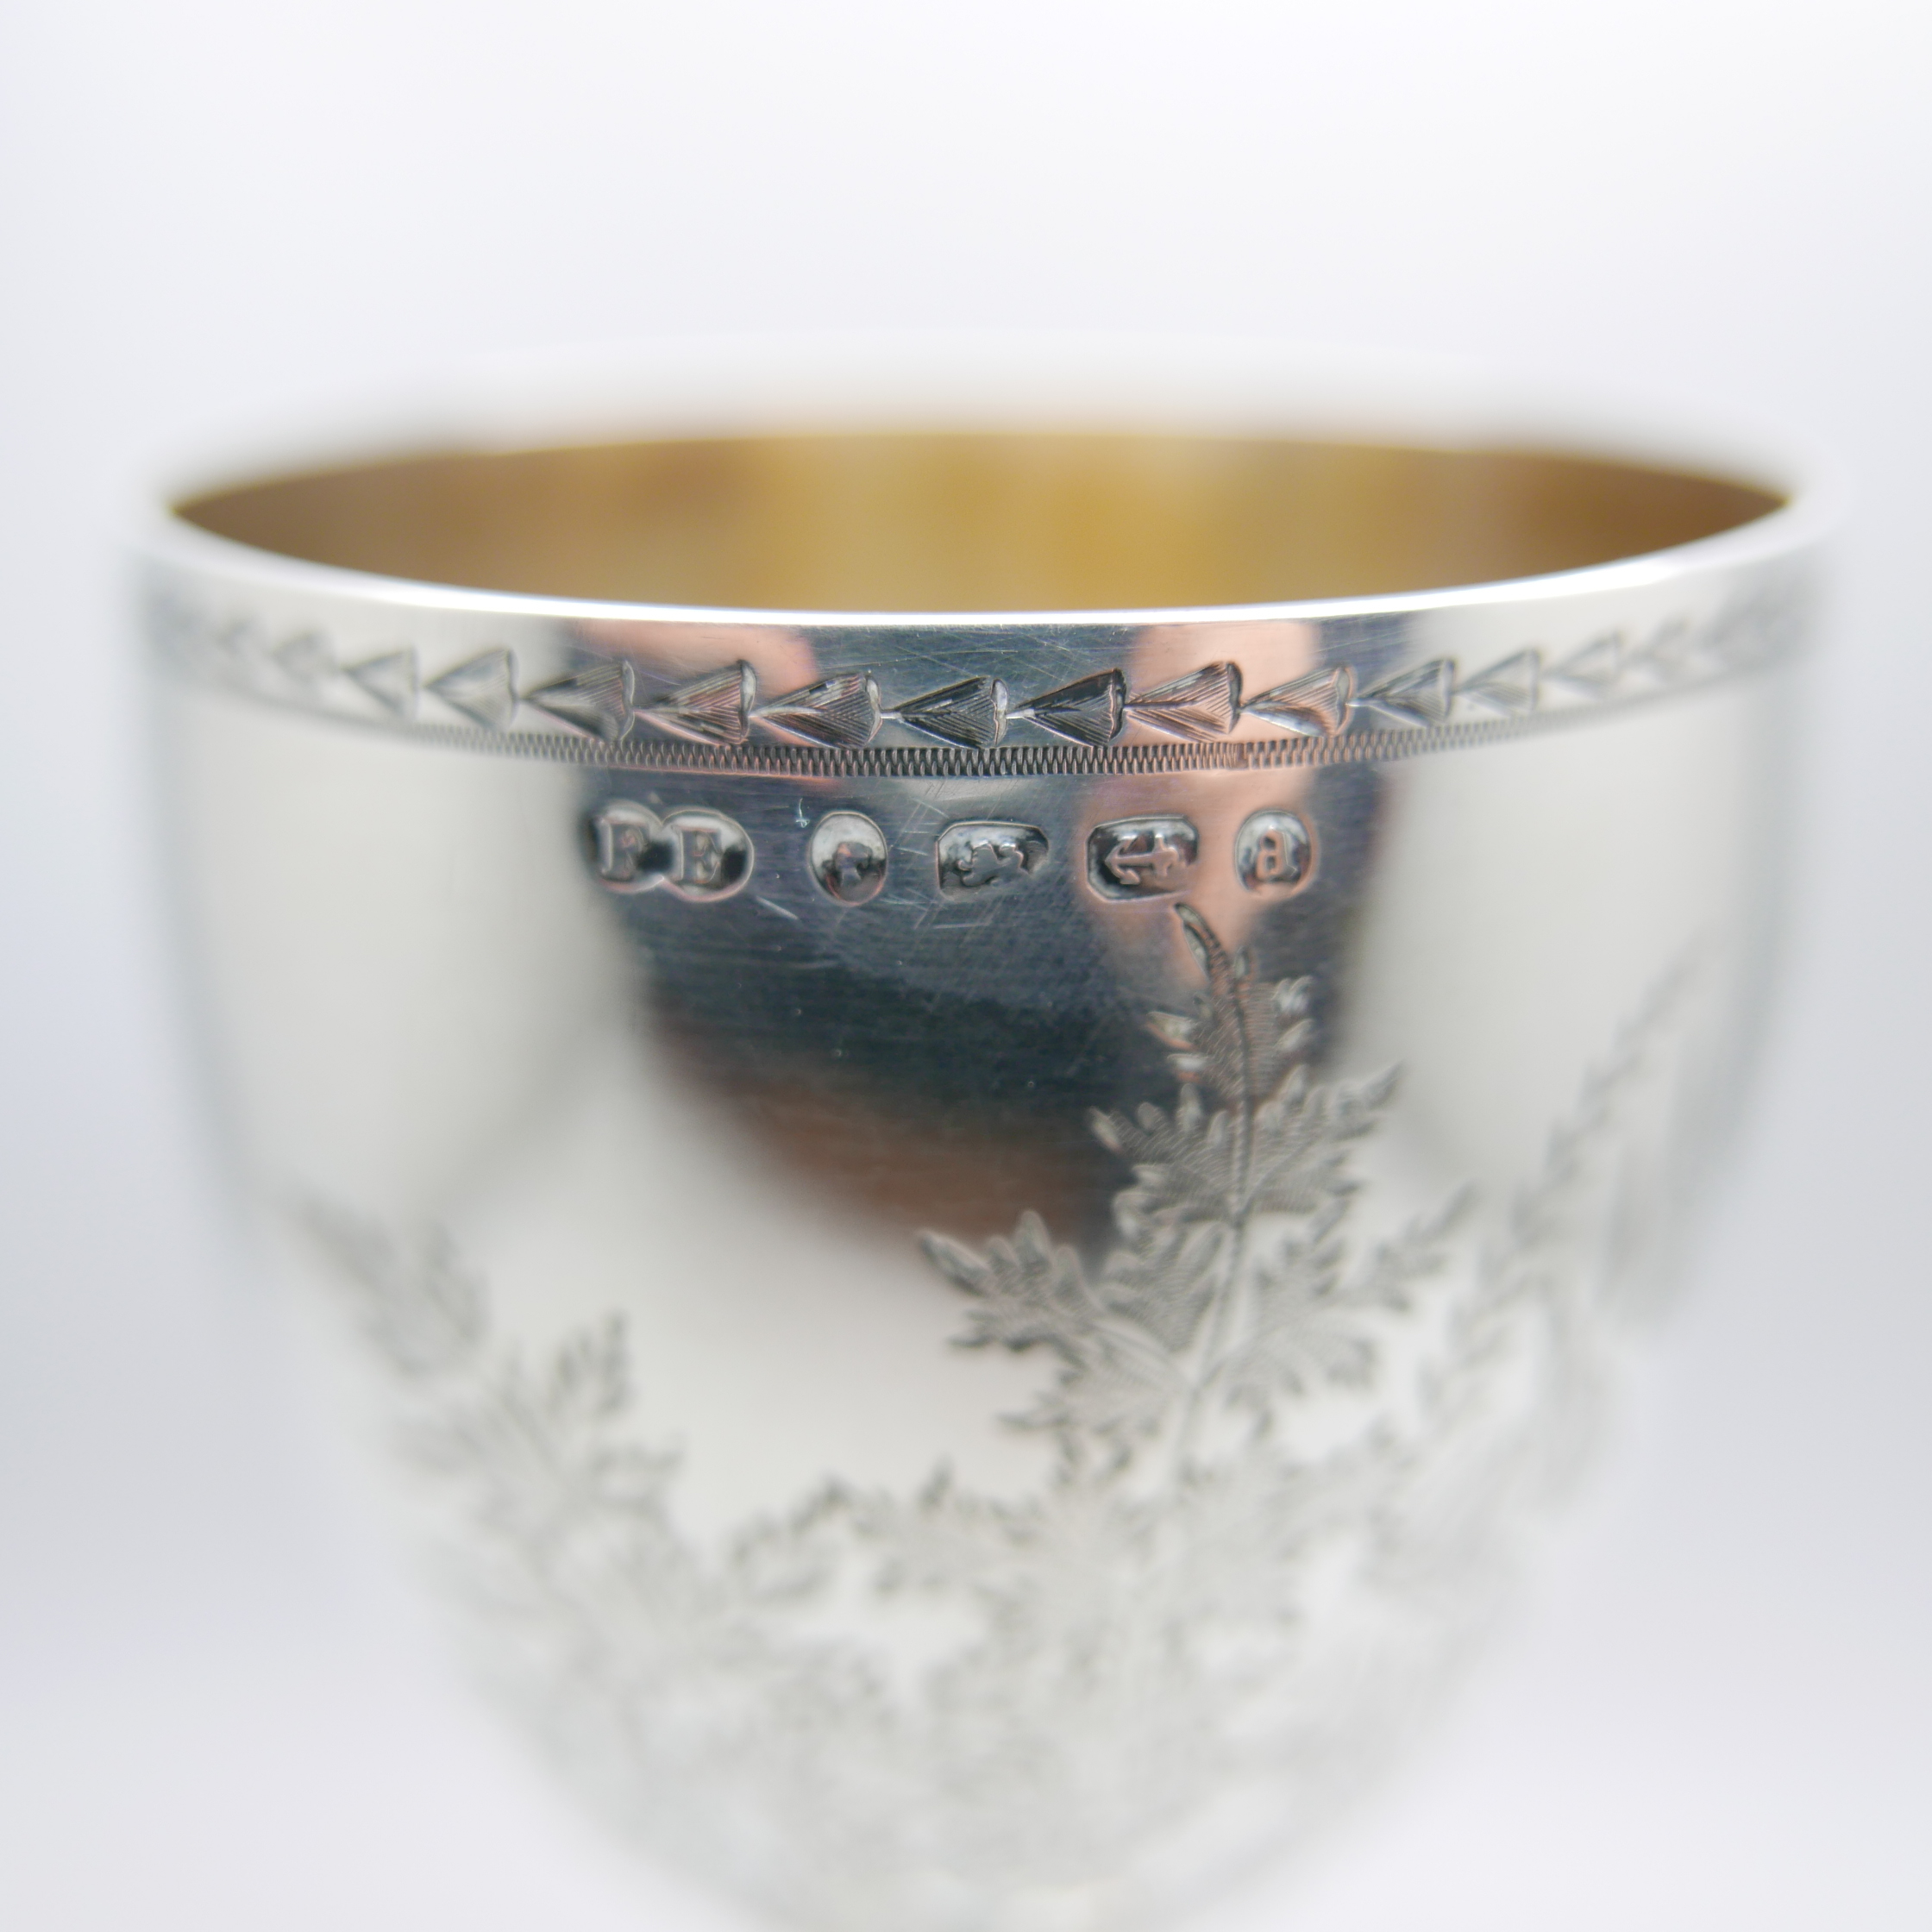 A Victorian silver goblet with cockerel detail and marked 'Kaiser', London 1856, Elkington & Co., - Image 6 of 6